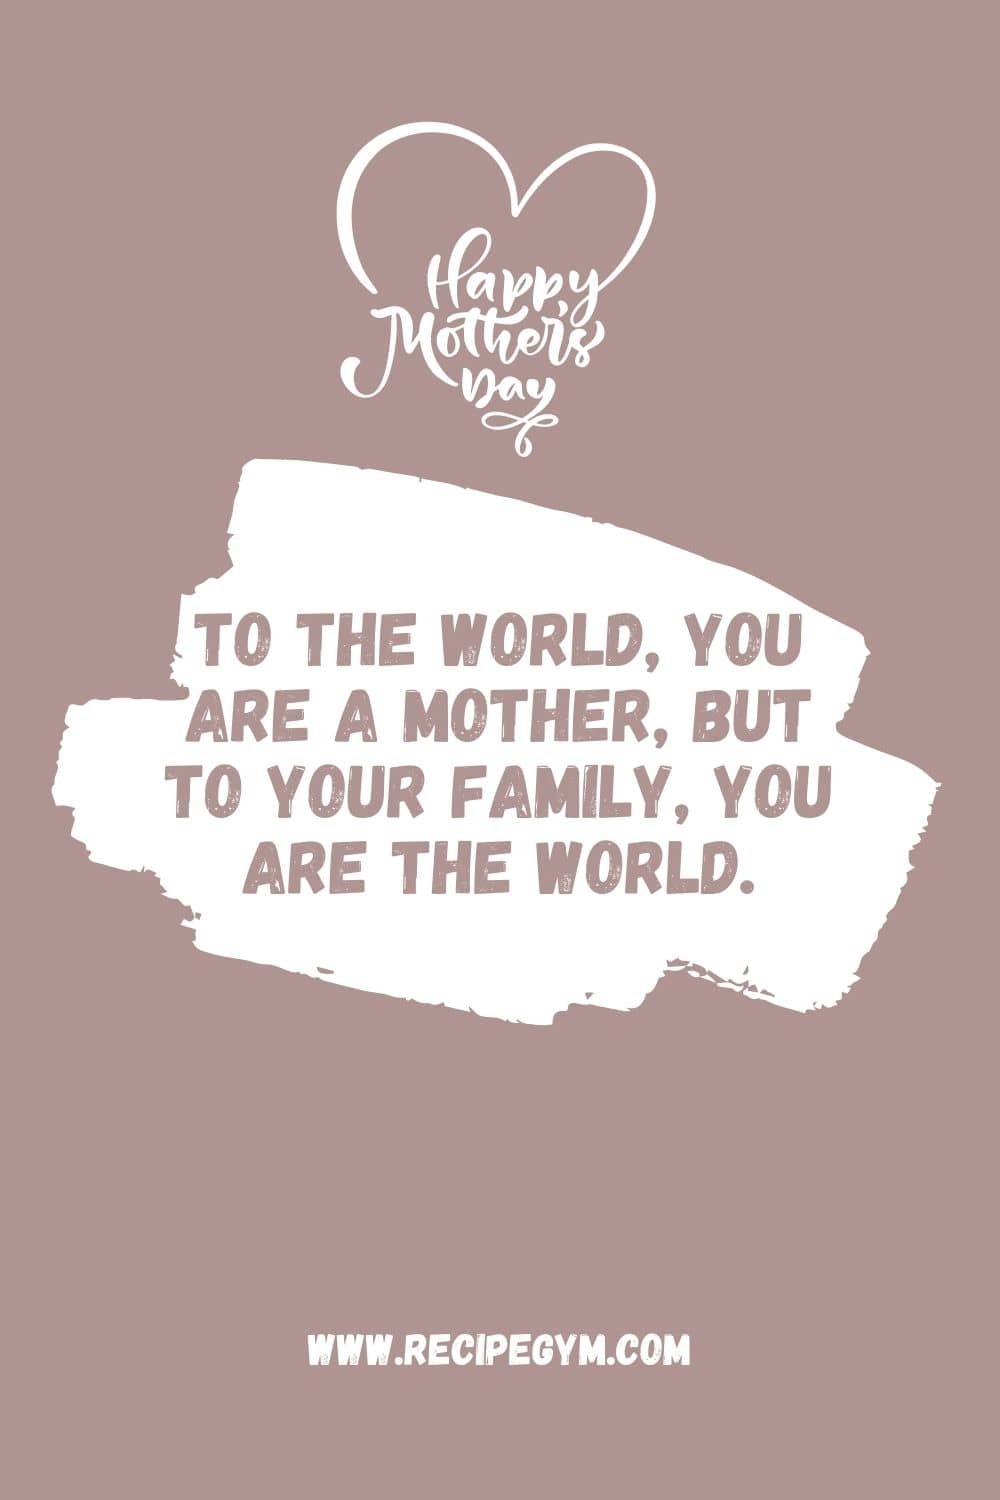 50+ Mothers Day Quotes For Loving Mothers, Grandmas and Aunts | Your Daily Recipes